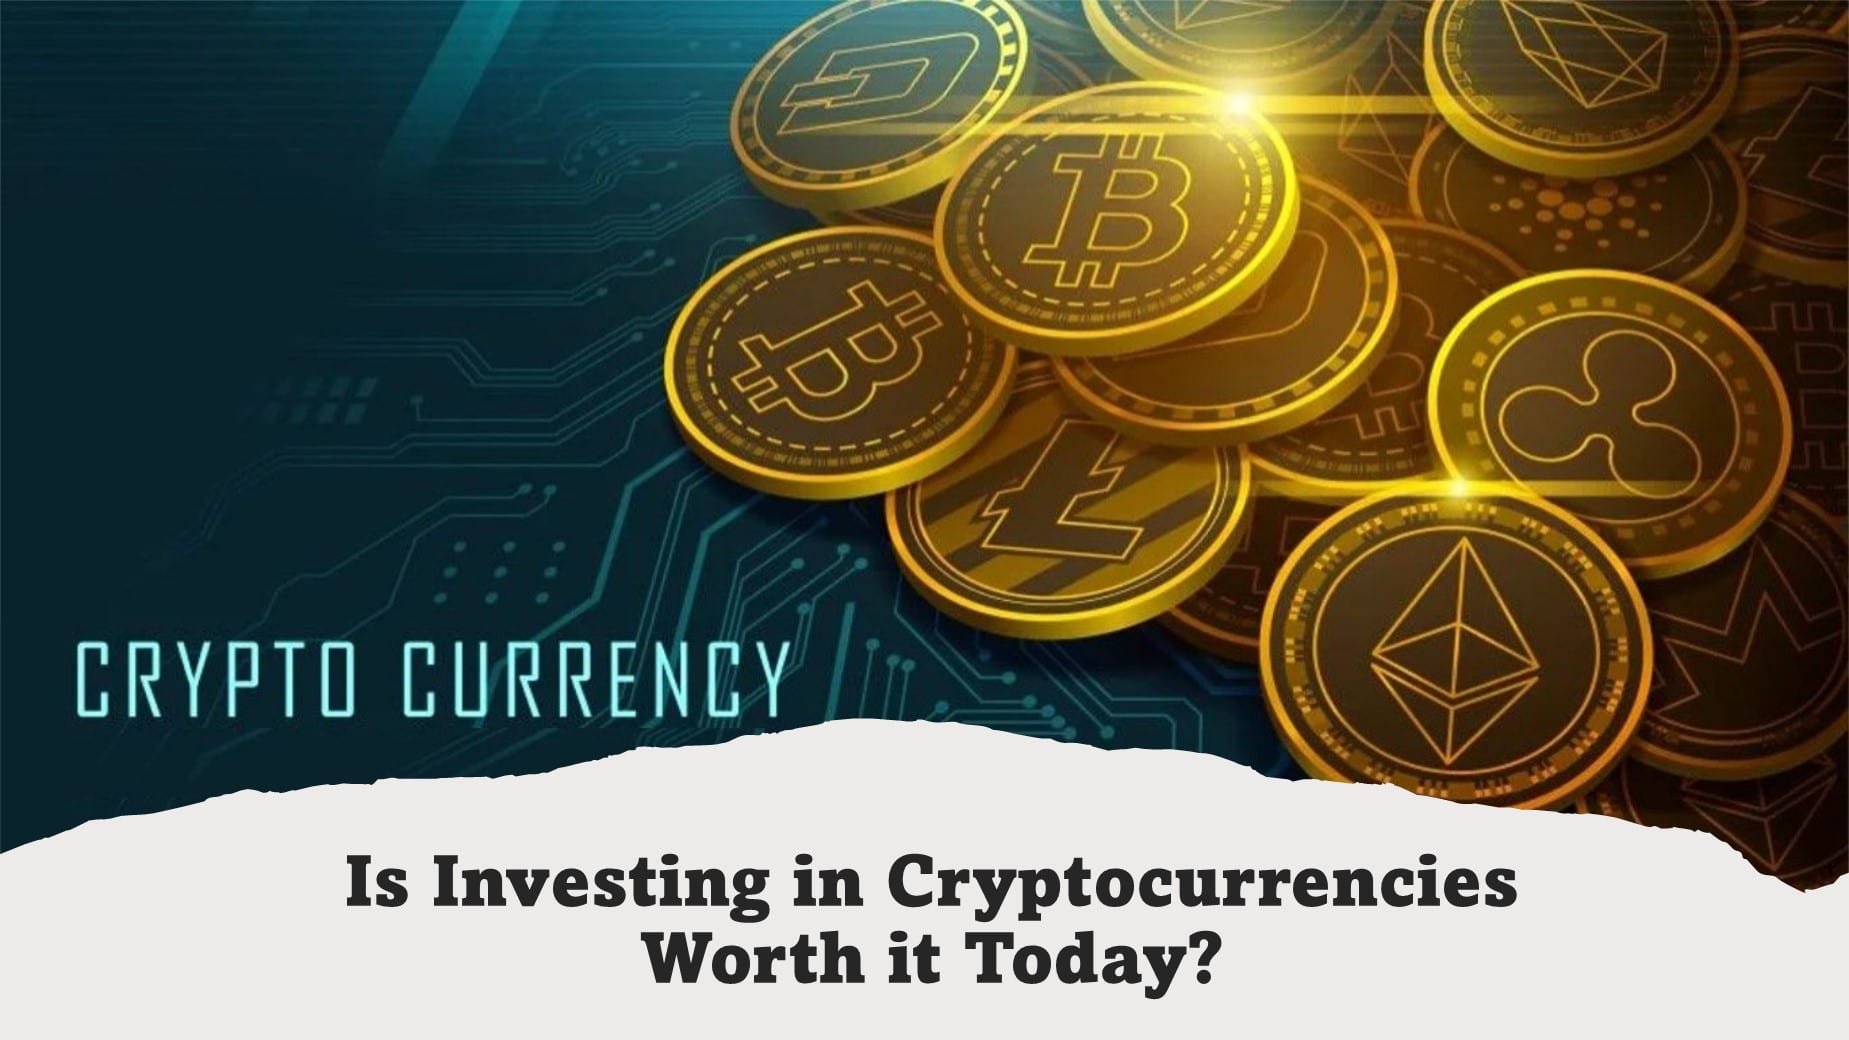 Investing in cryptocurrencies is it worth it?